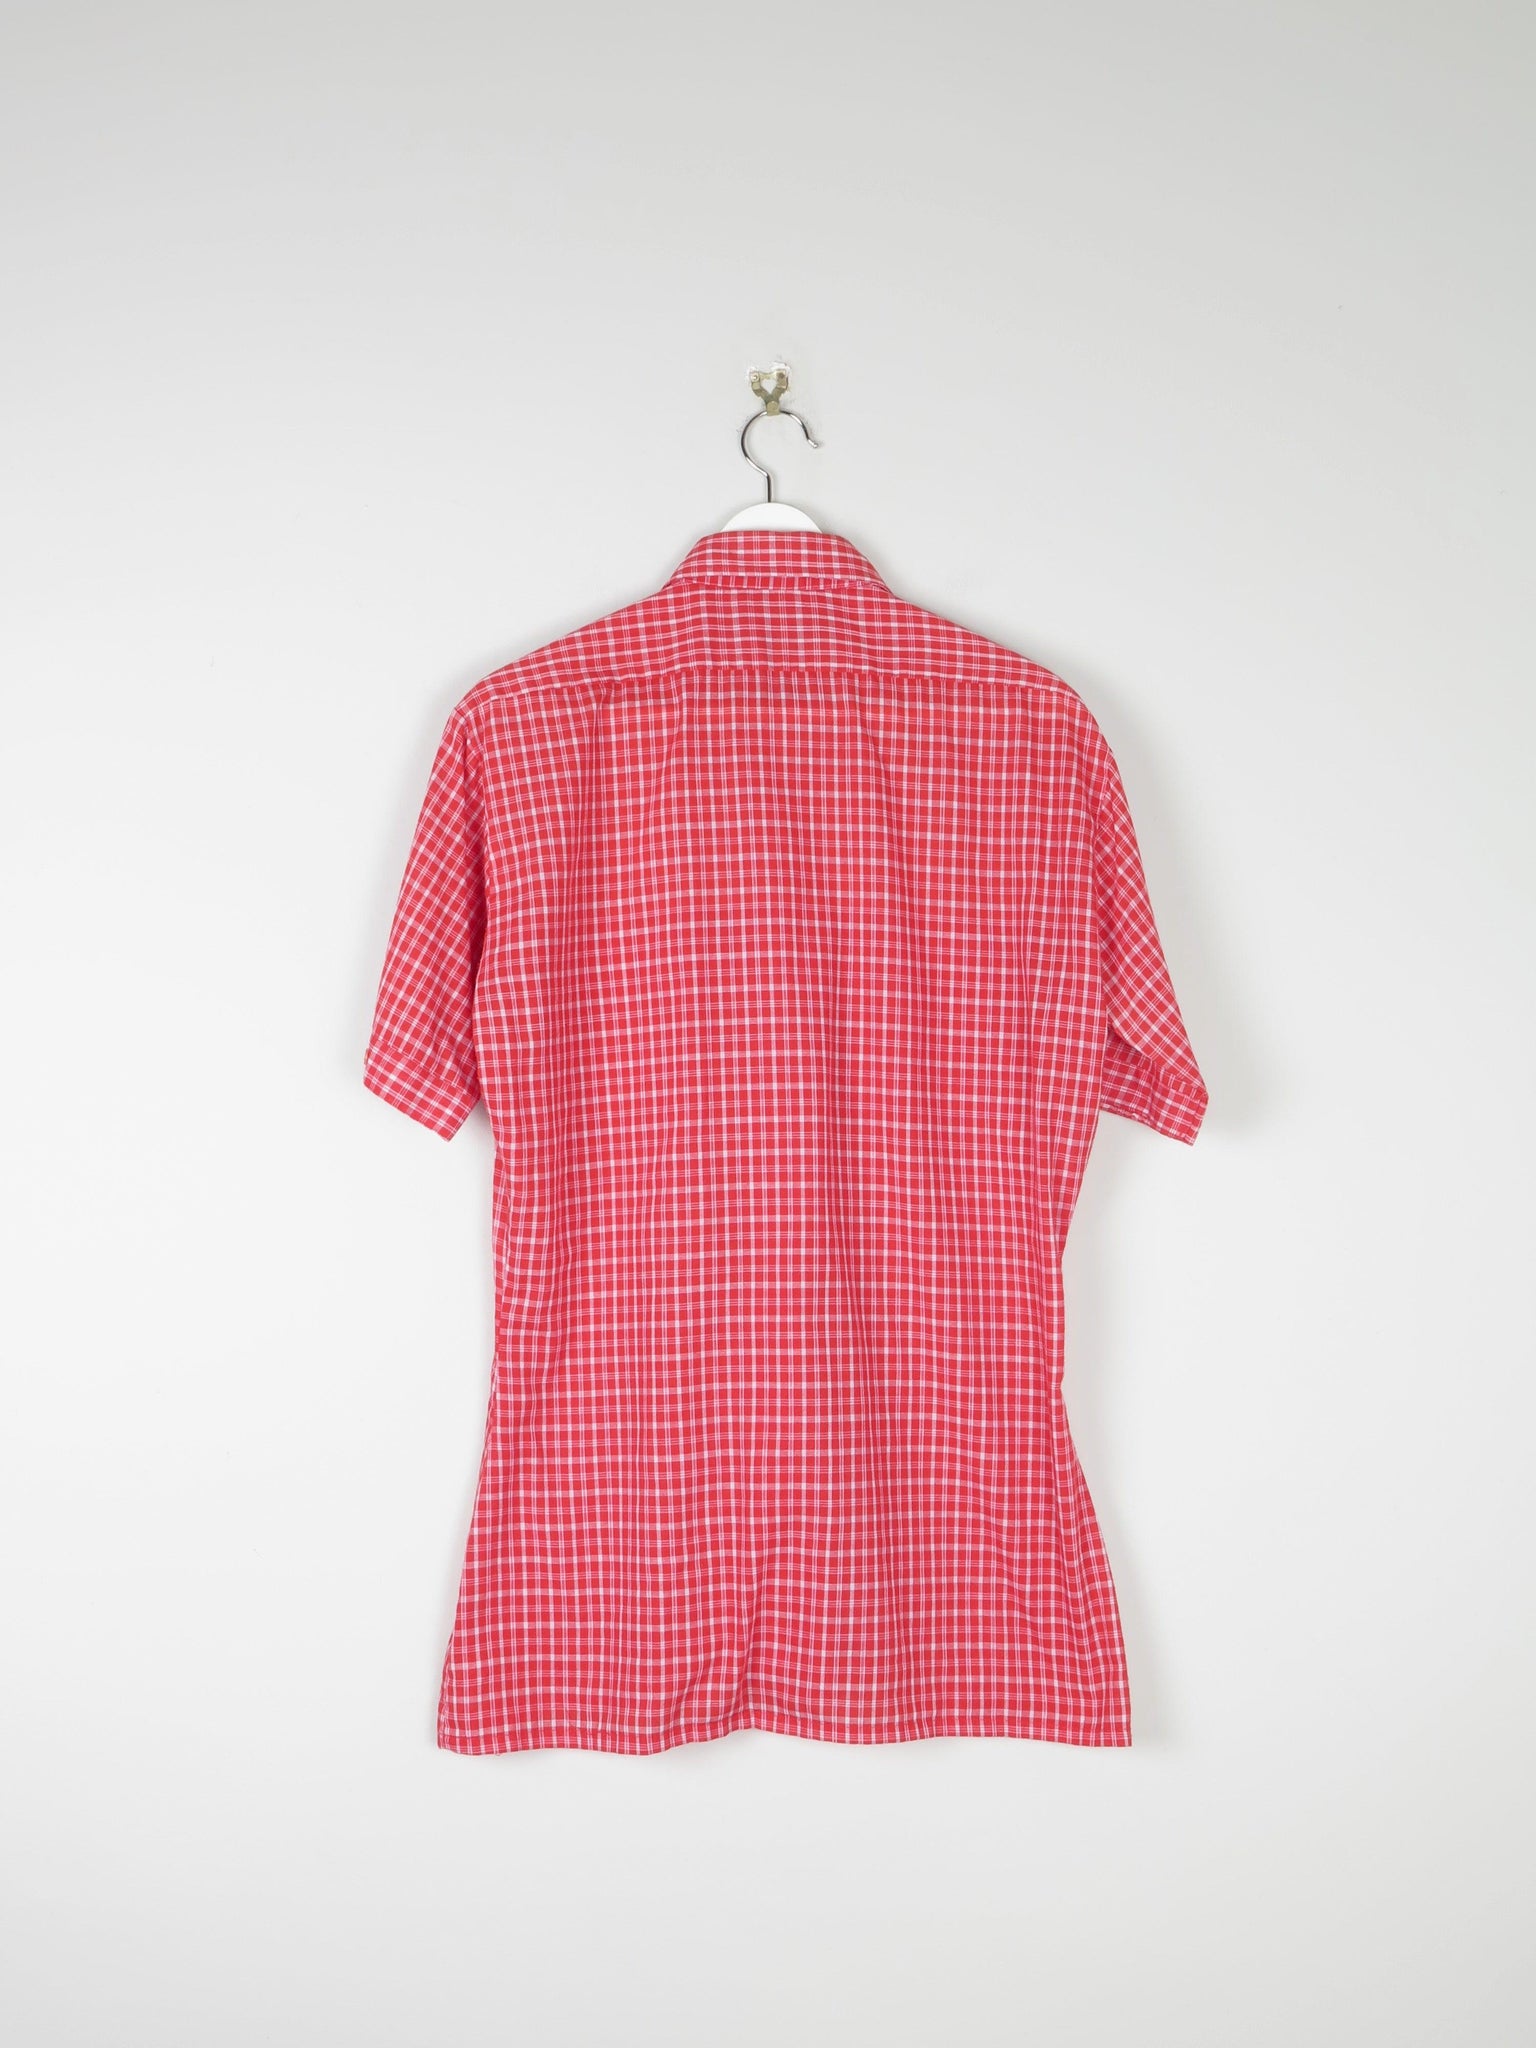 Mens Red Check  1970s Shirt M - The Harlequin